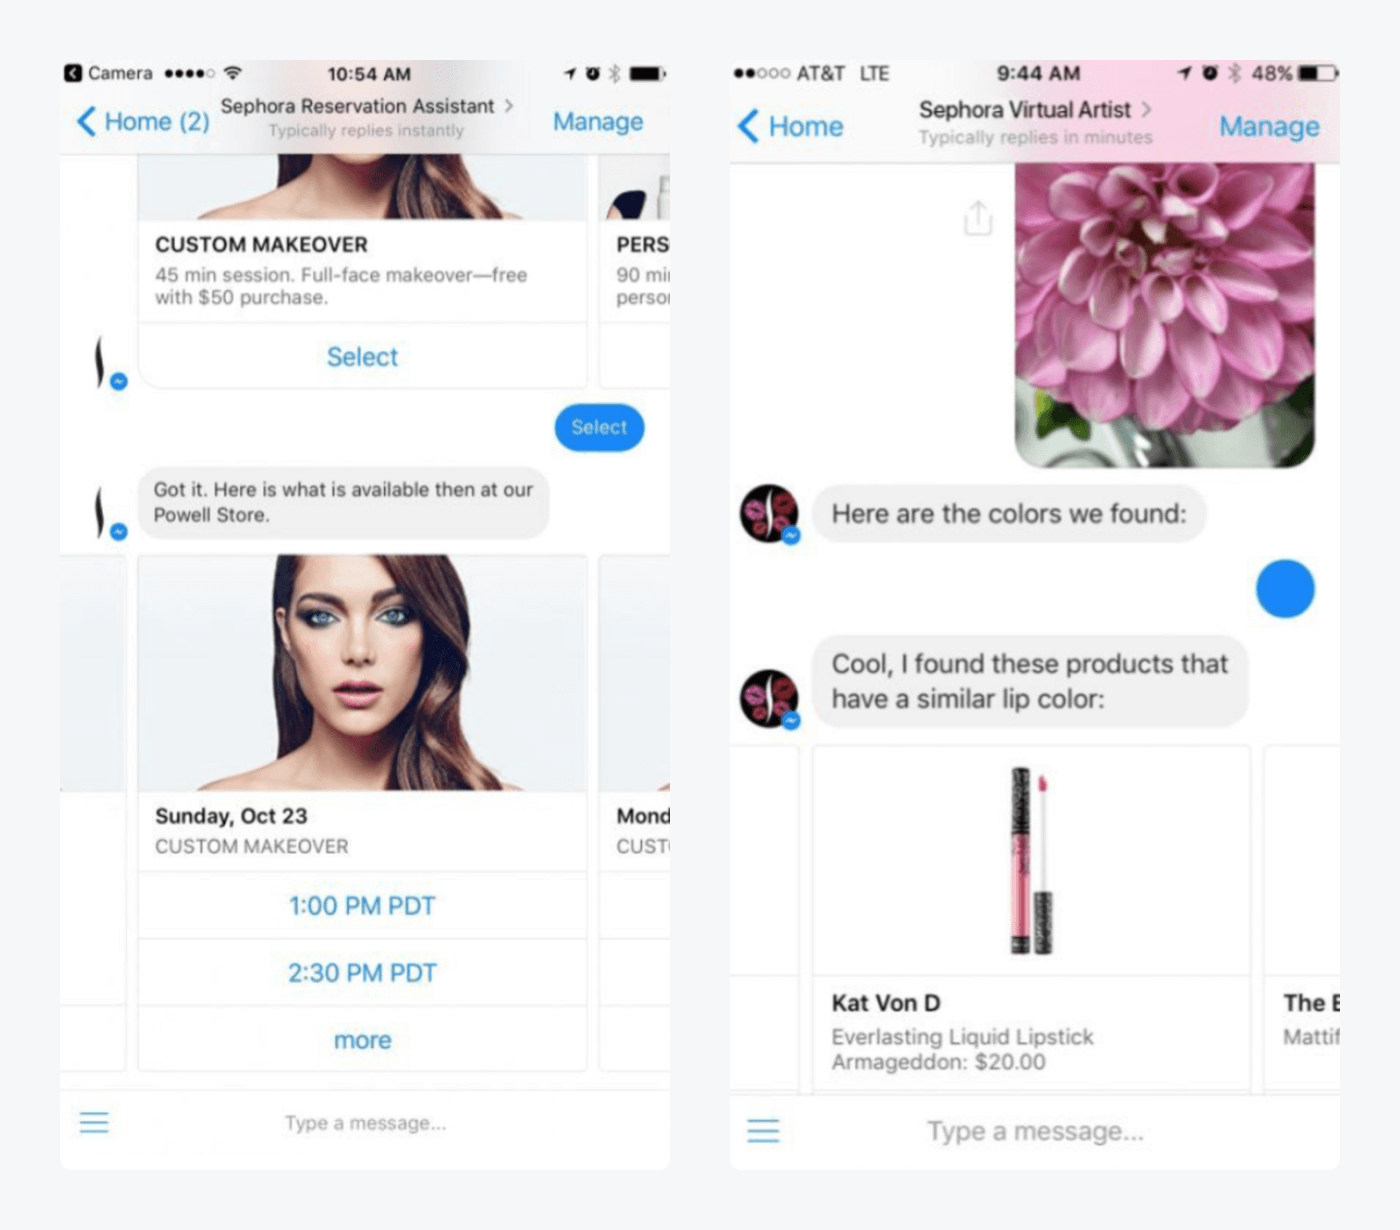 sephora's landing page with shopping bot